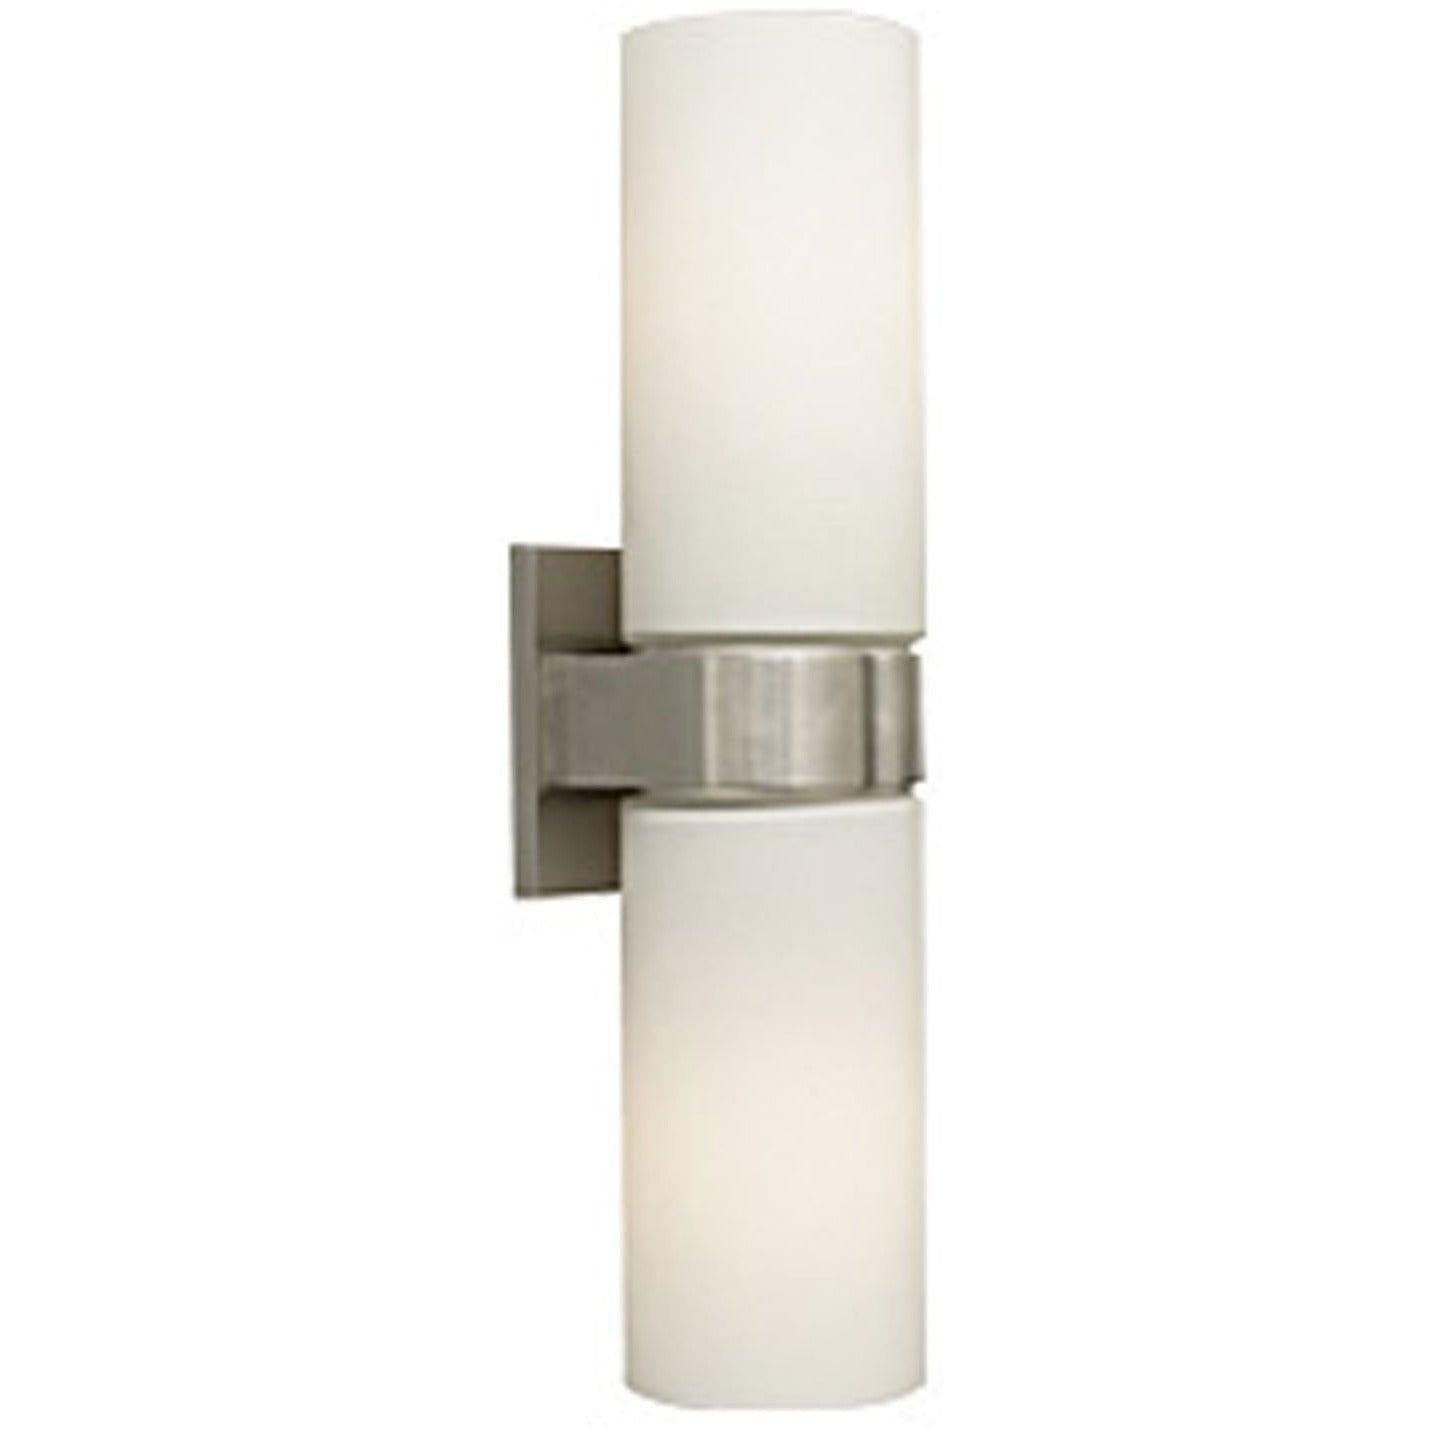 RL2761NB by Visual Comfort - Perren Medium Wall Sconce in Natural